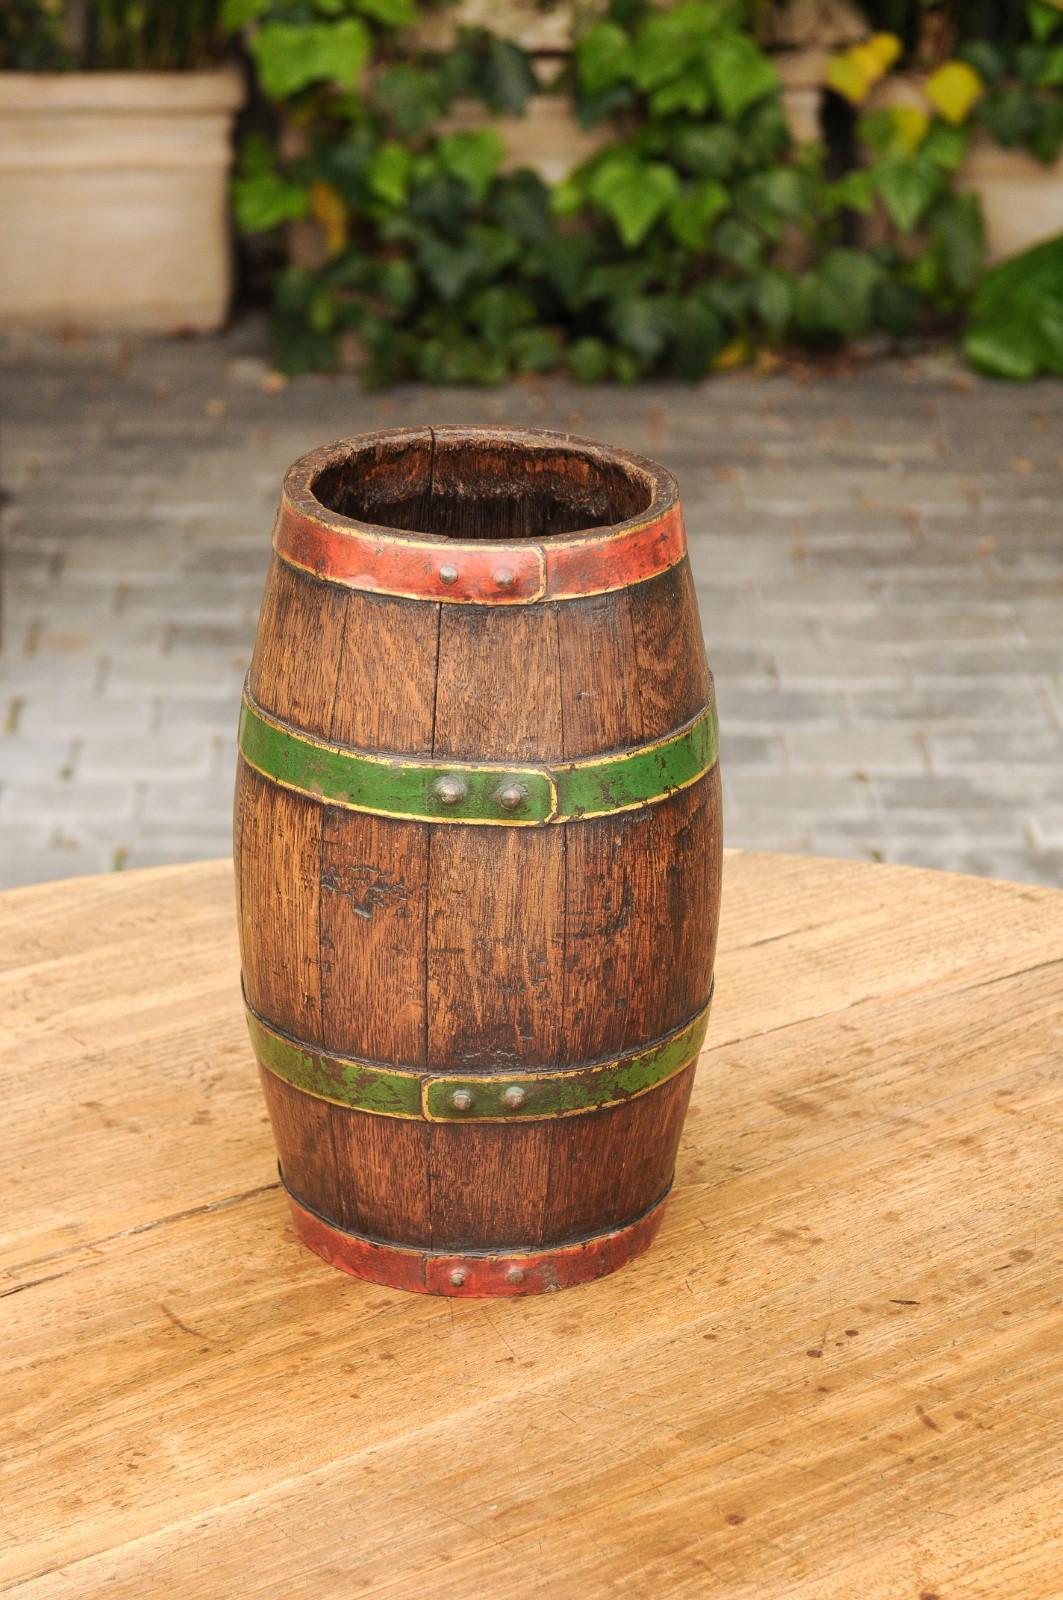 Petite 1900s Rustic English Edwardian Wooden Barrel with Green and Red Accents 2